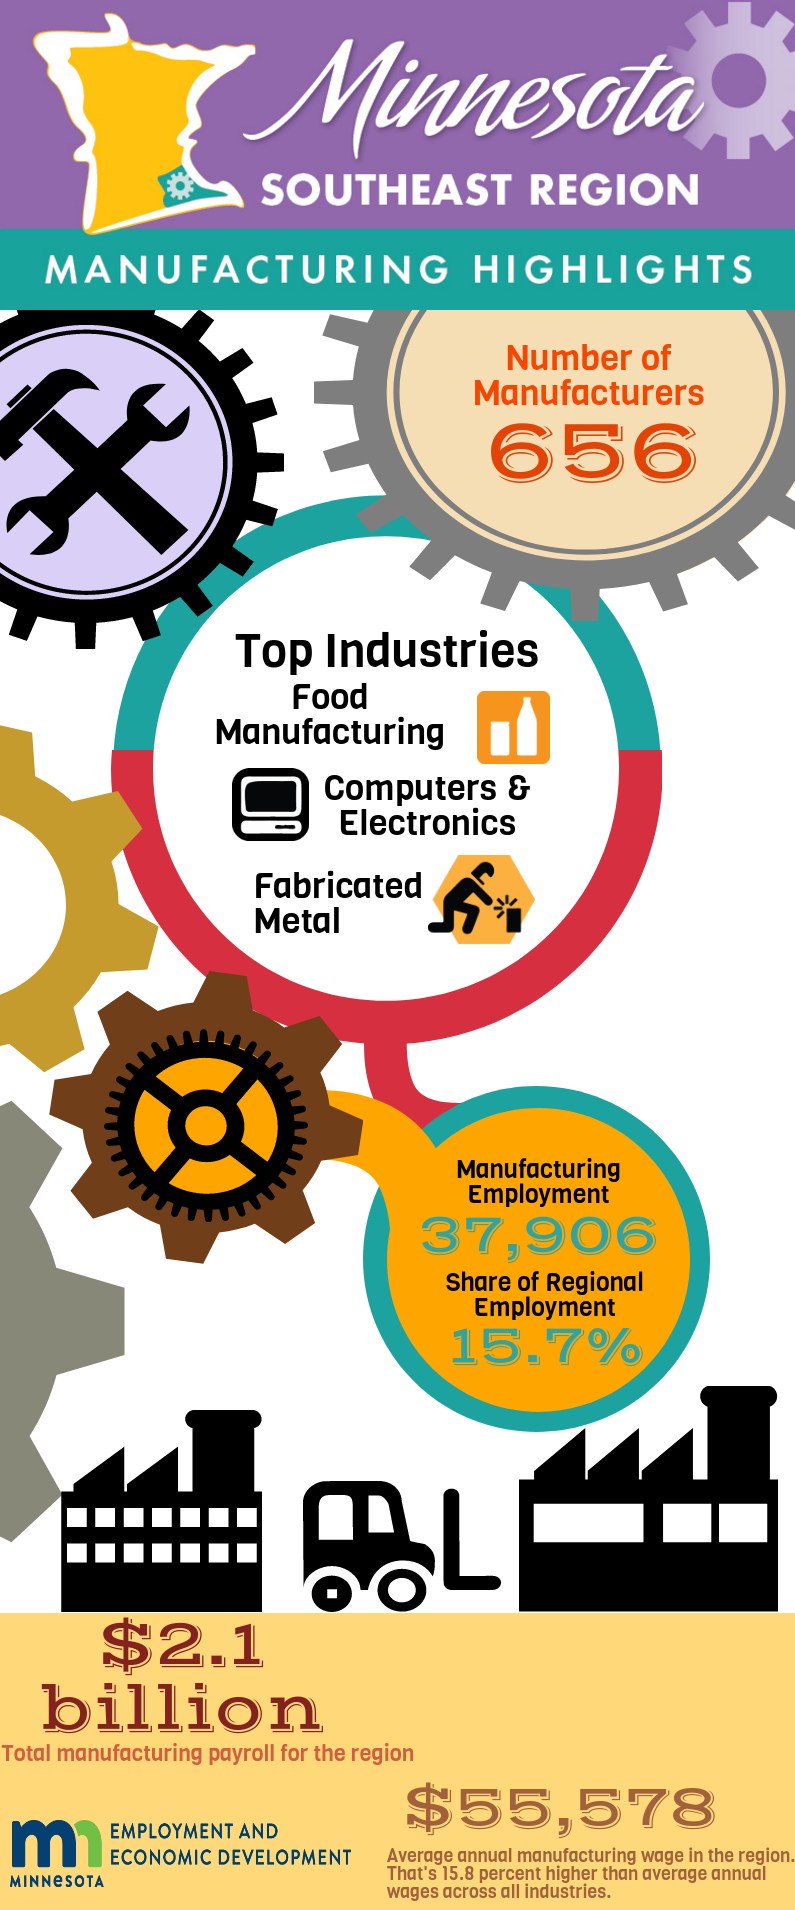 Southeast Region Manufacturing Highlights